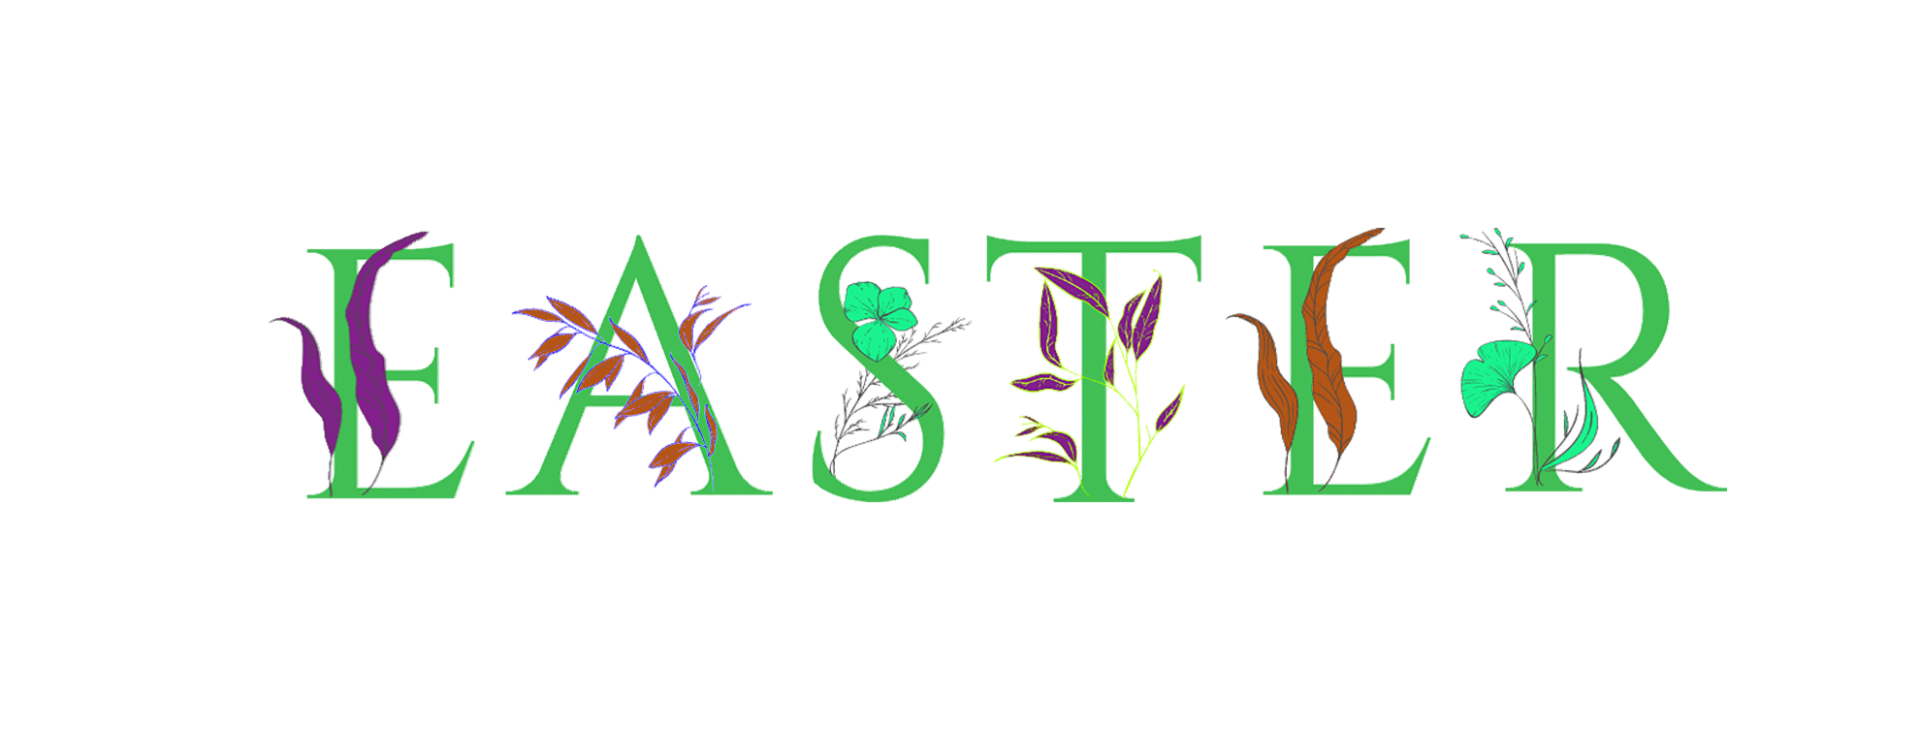 letters spelling Easter wrapped with flowers and plants on transparent background